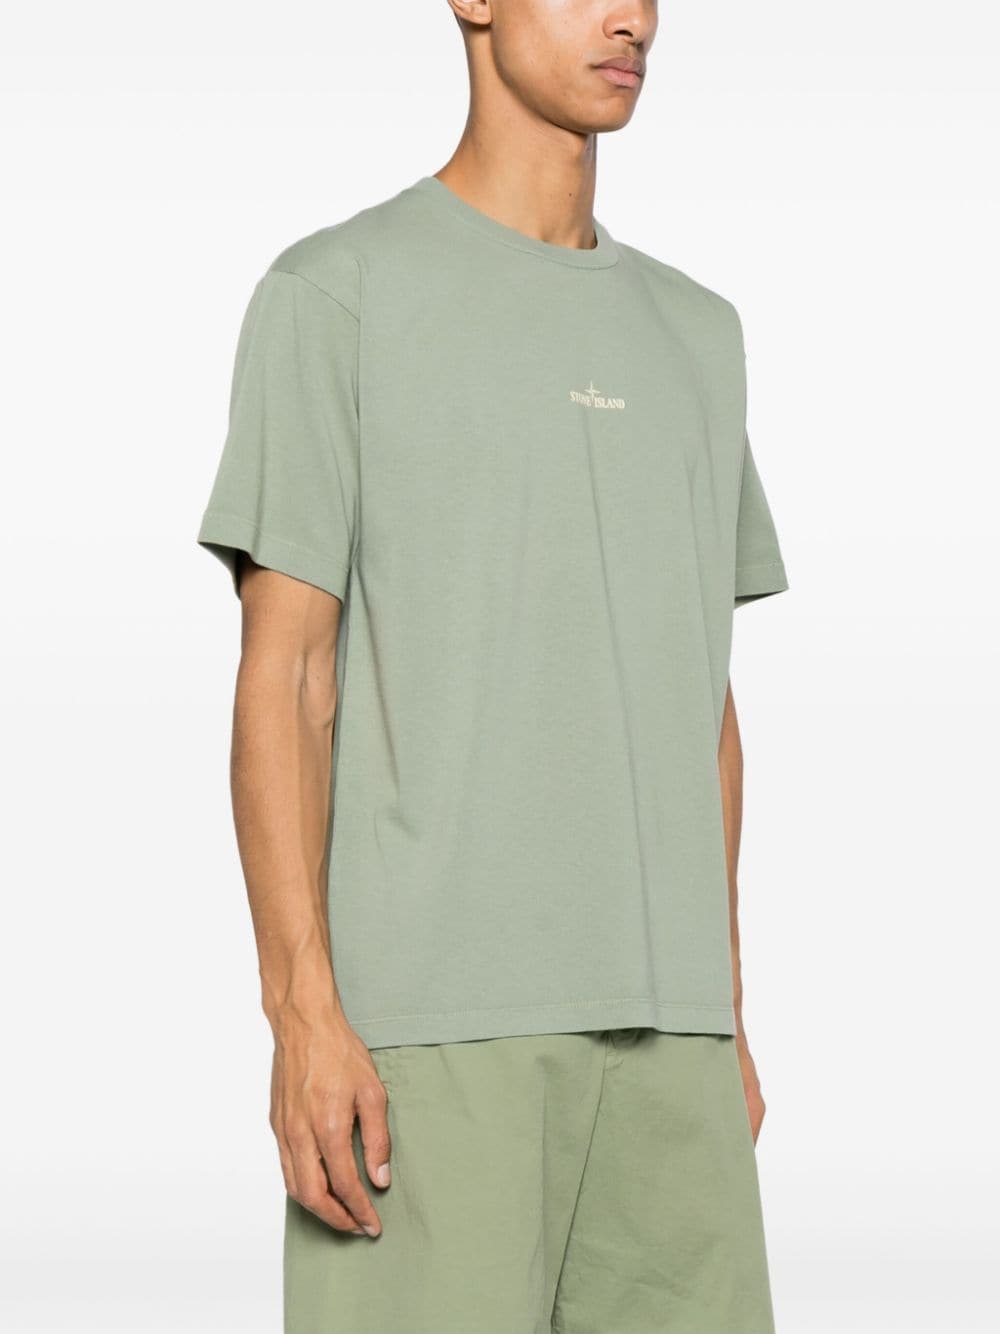 Stone Island - T-Shirt sage 2RC89 'SCRATCHED PAINT ONE' PRINT - Lothaire